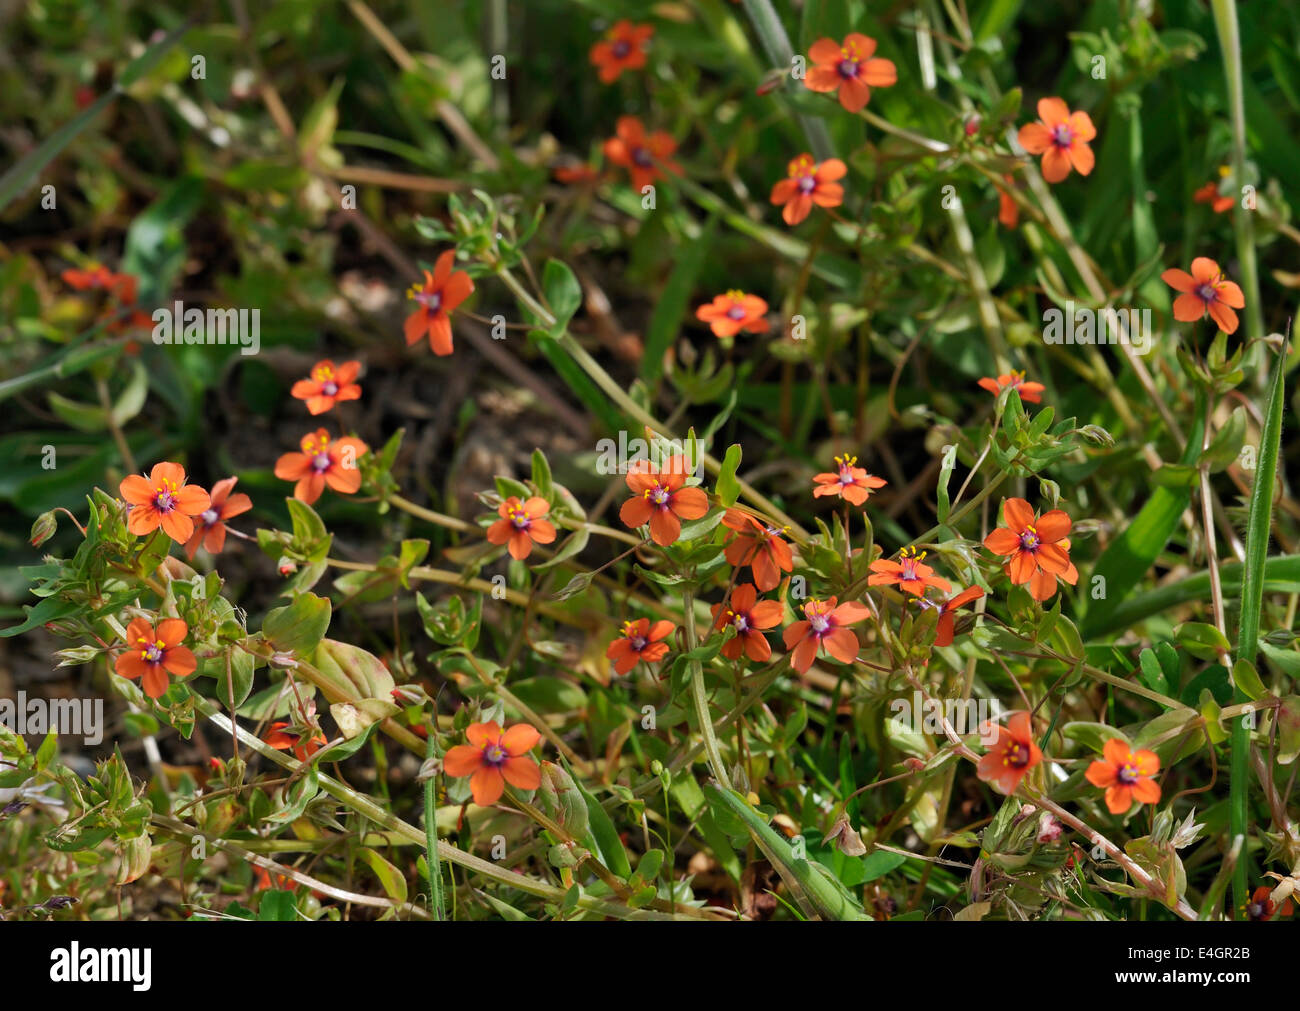 Scarlet Pimpernel - Anagallis arvensis Mass of small red flowers Stock Photo